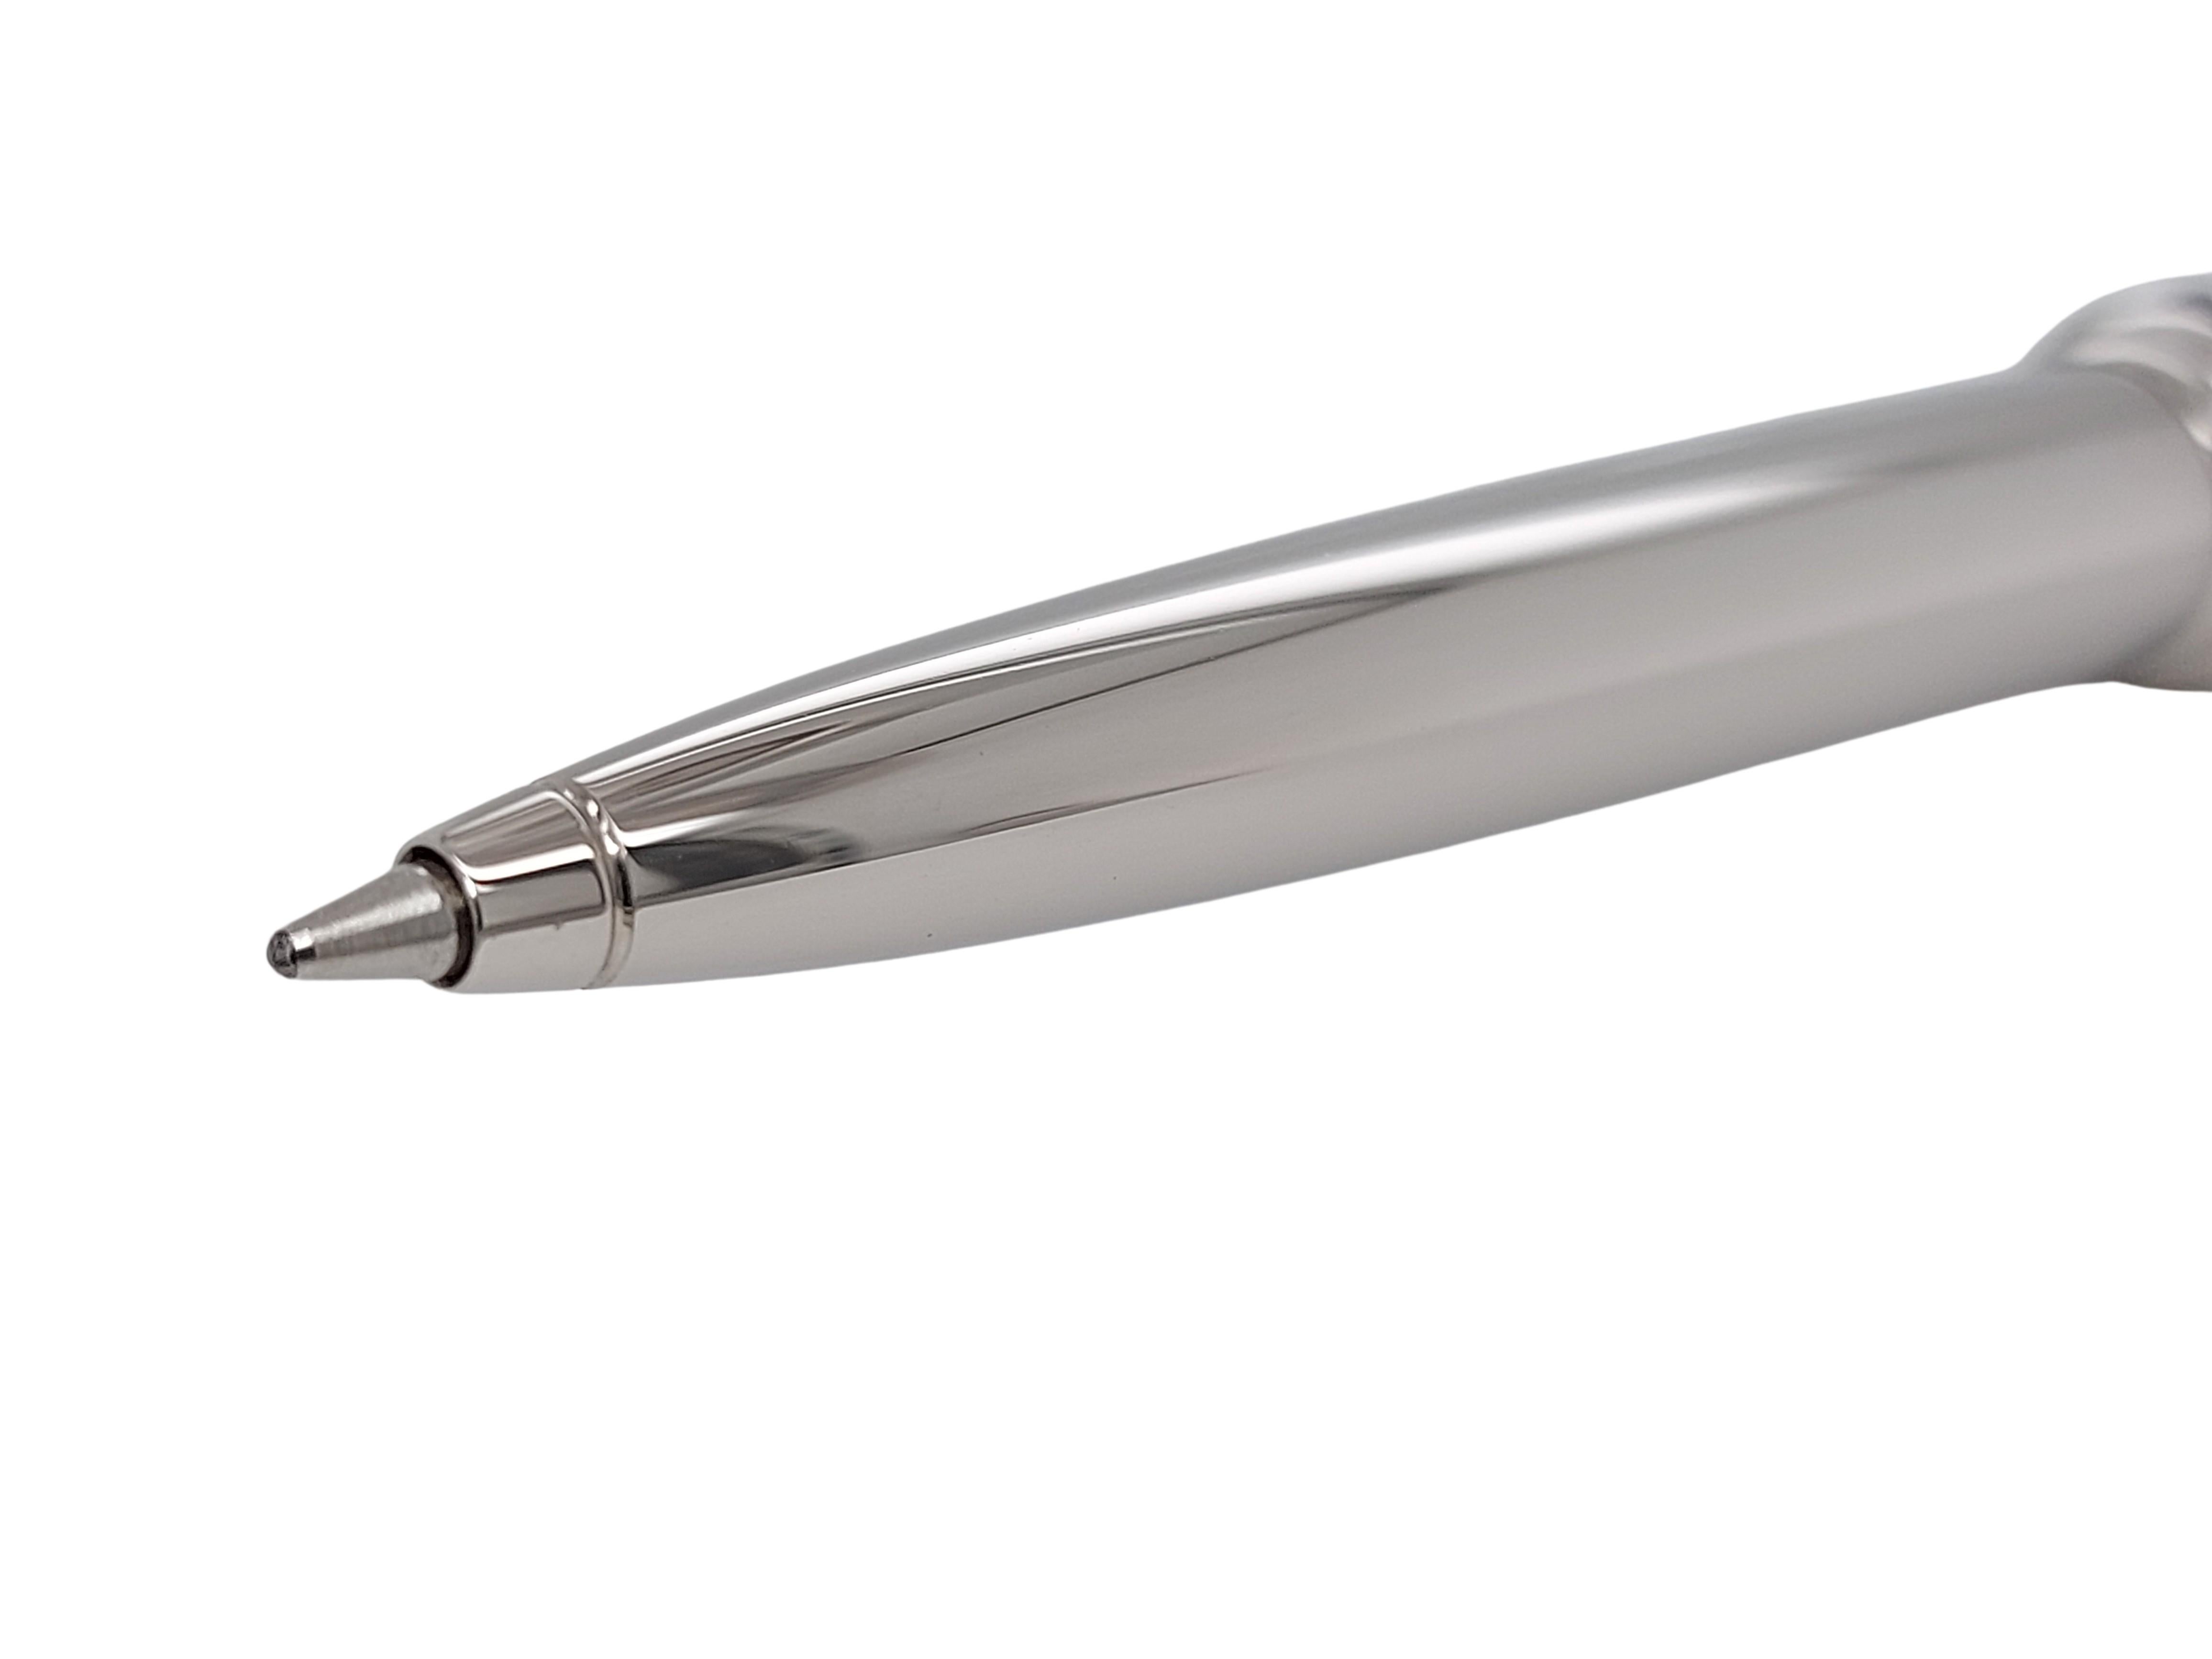 montblanc stainless steel pen